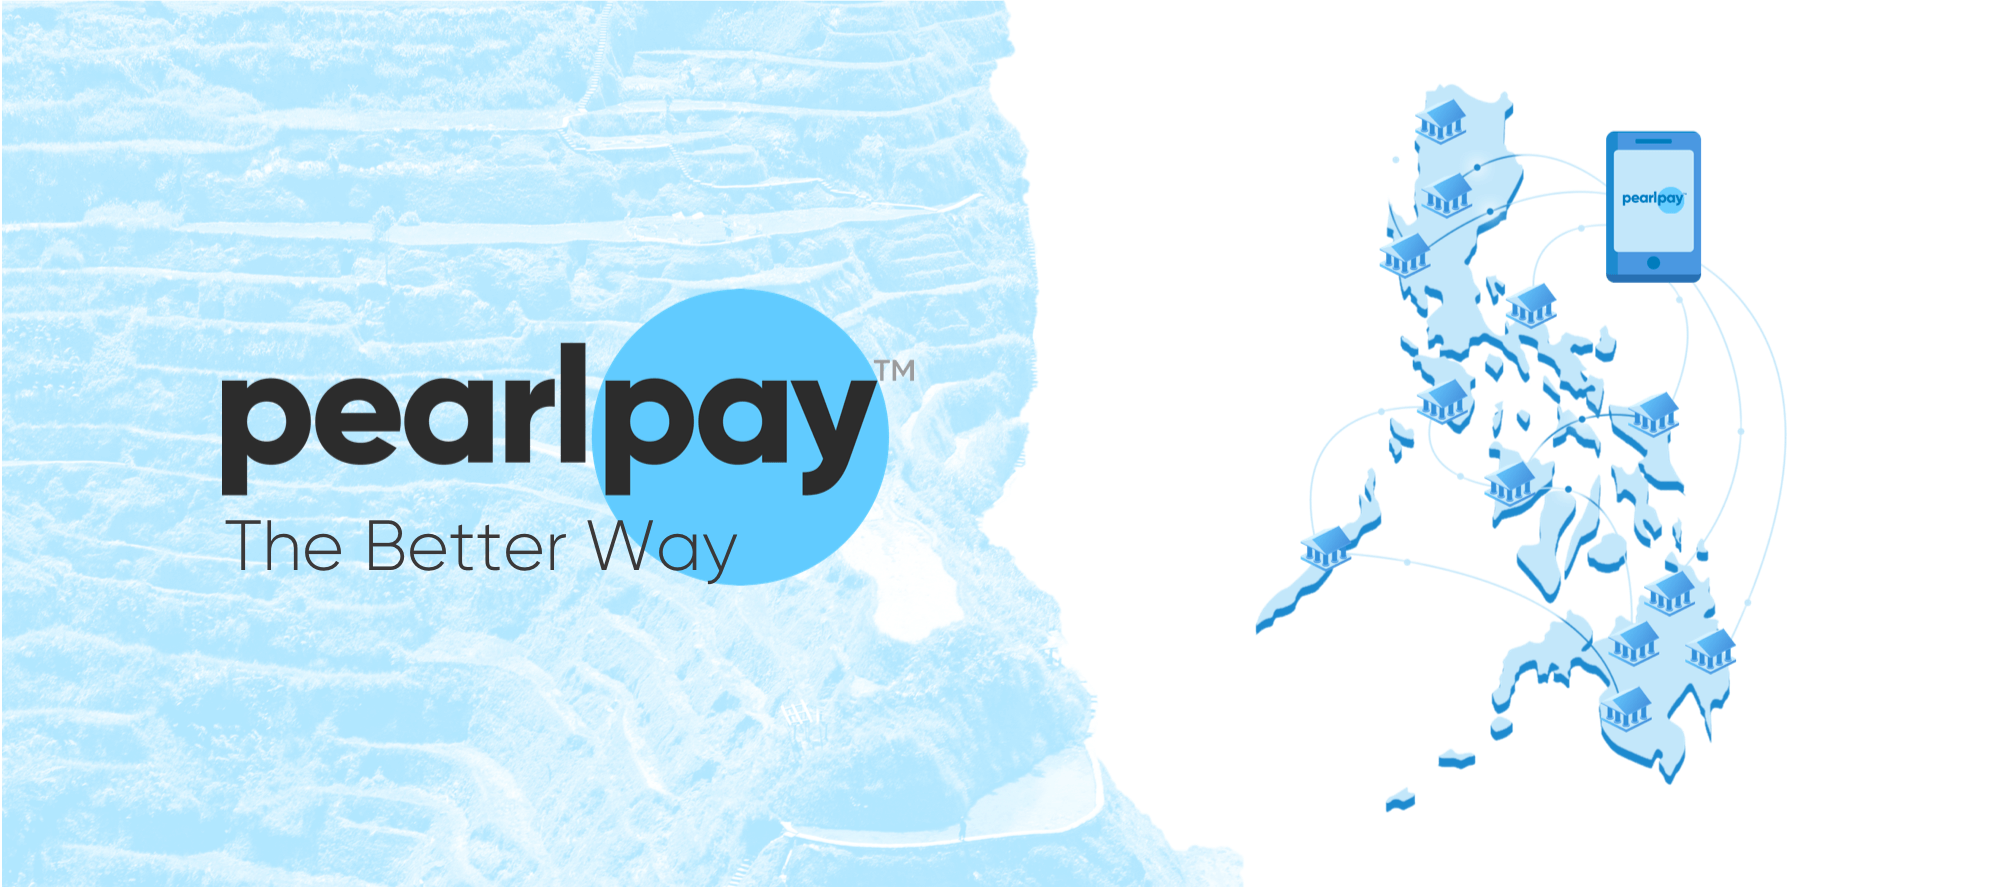 PearlPay Solutions Digitizing the Rural Banking System